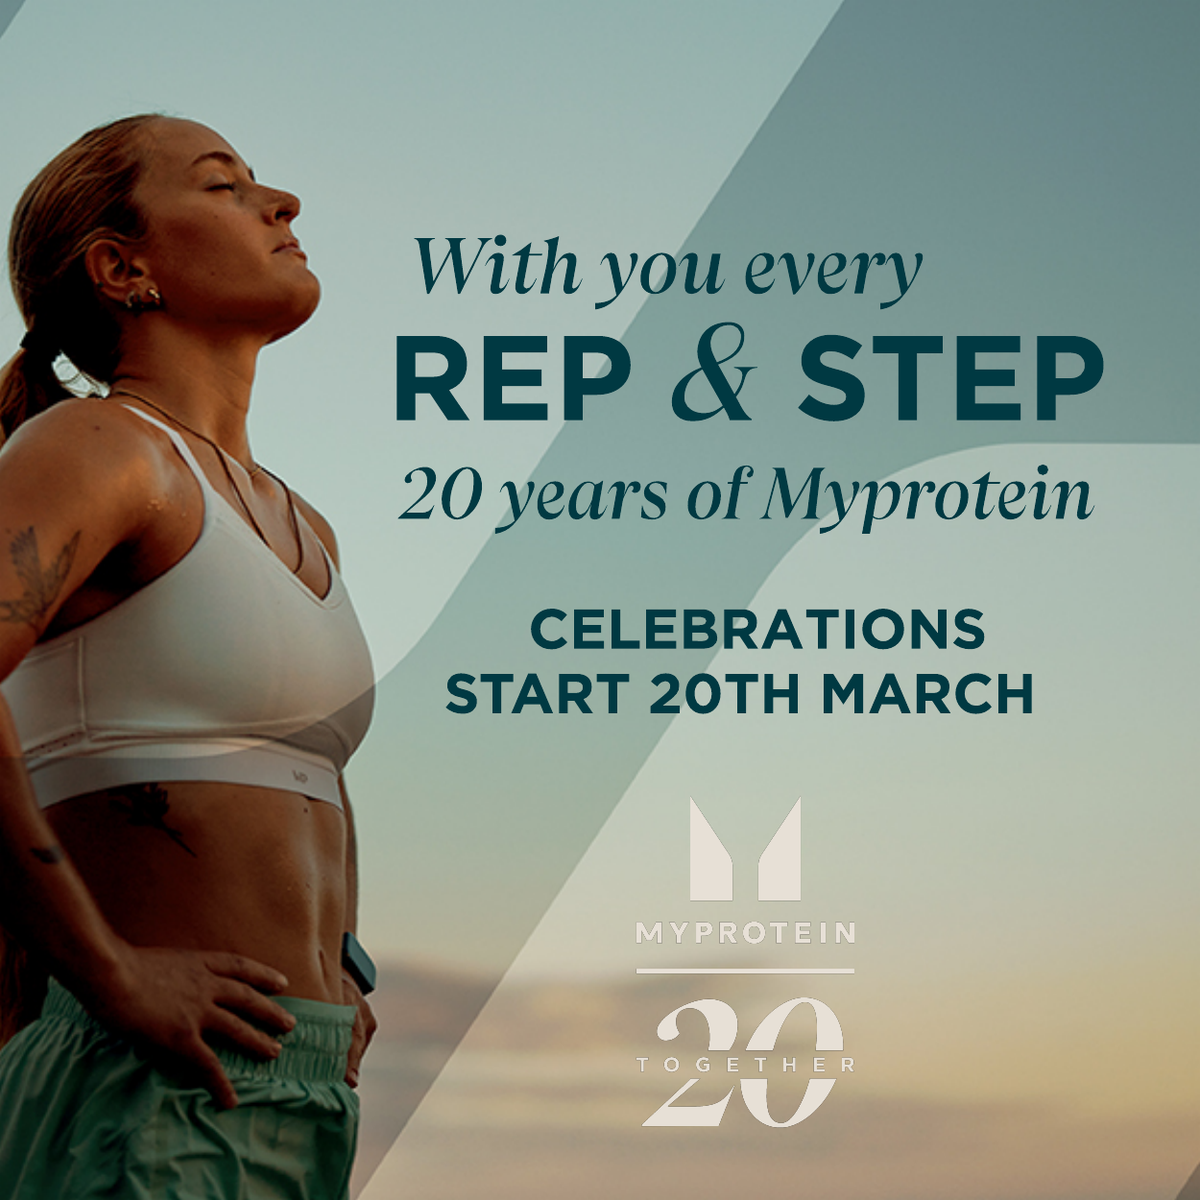 20 Years of Myprotein. Celebrations Starts 20th March